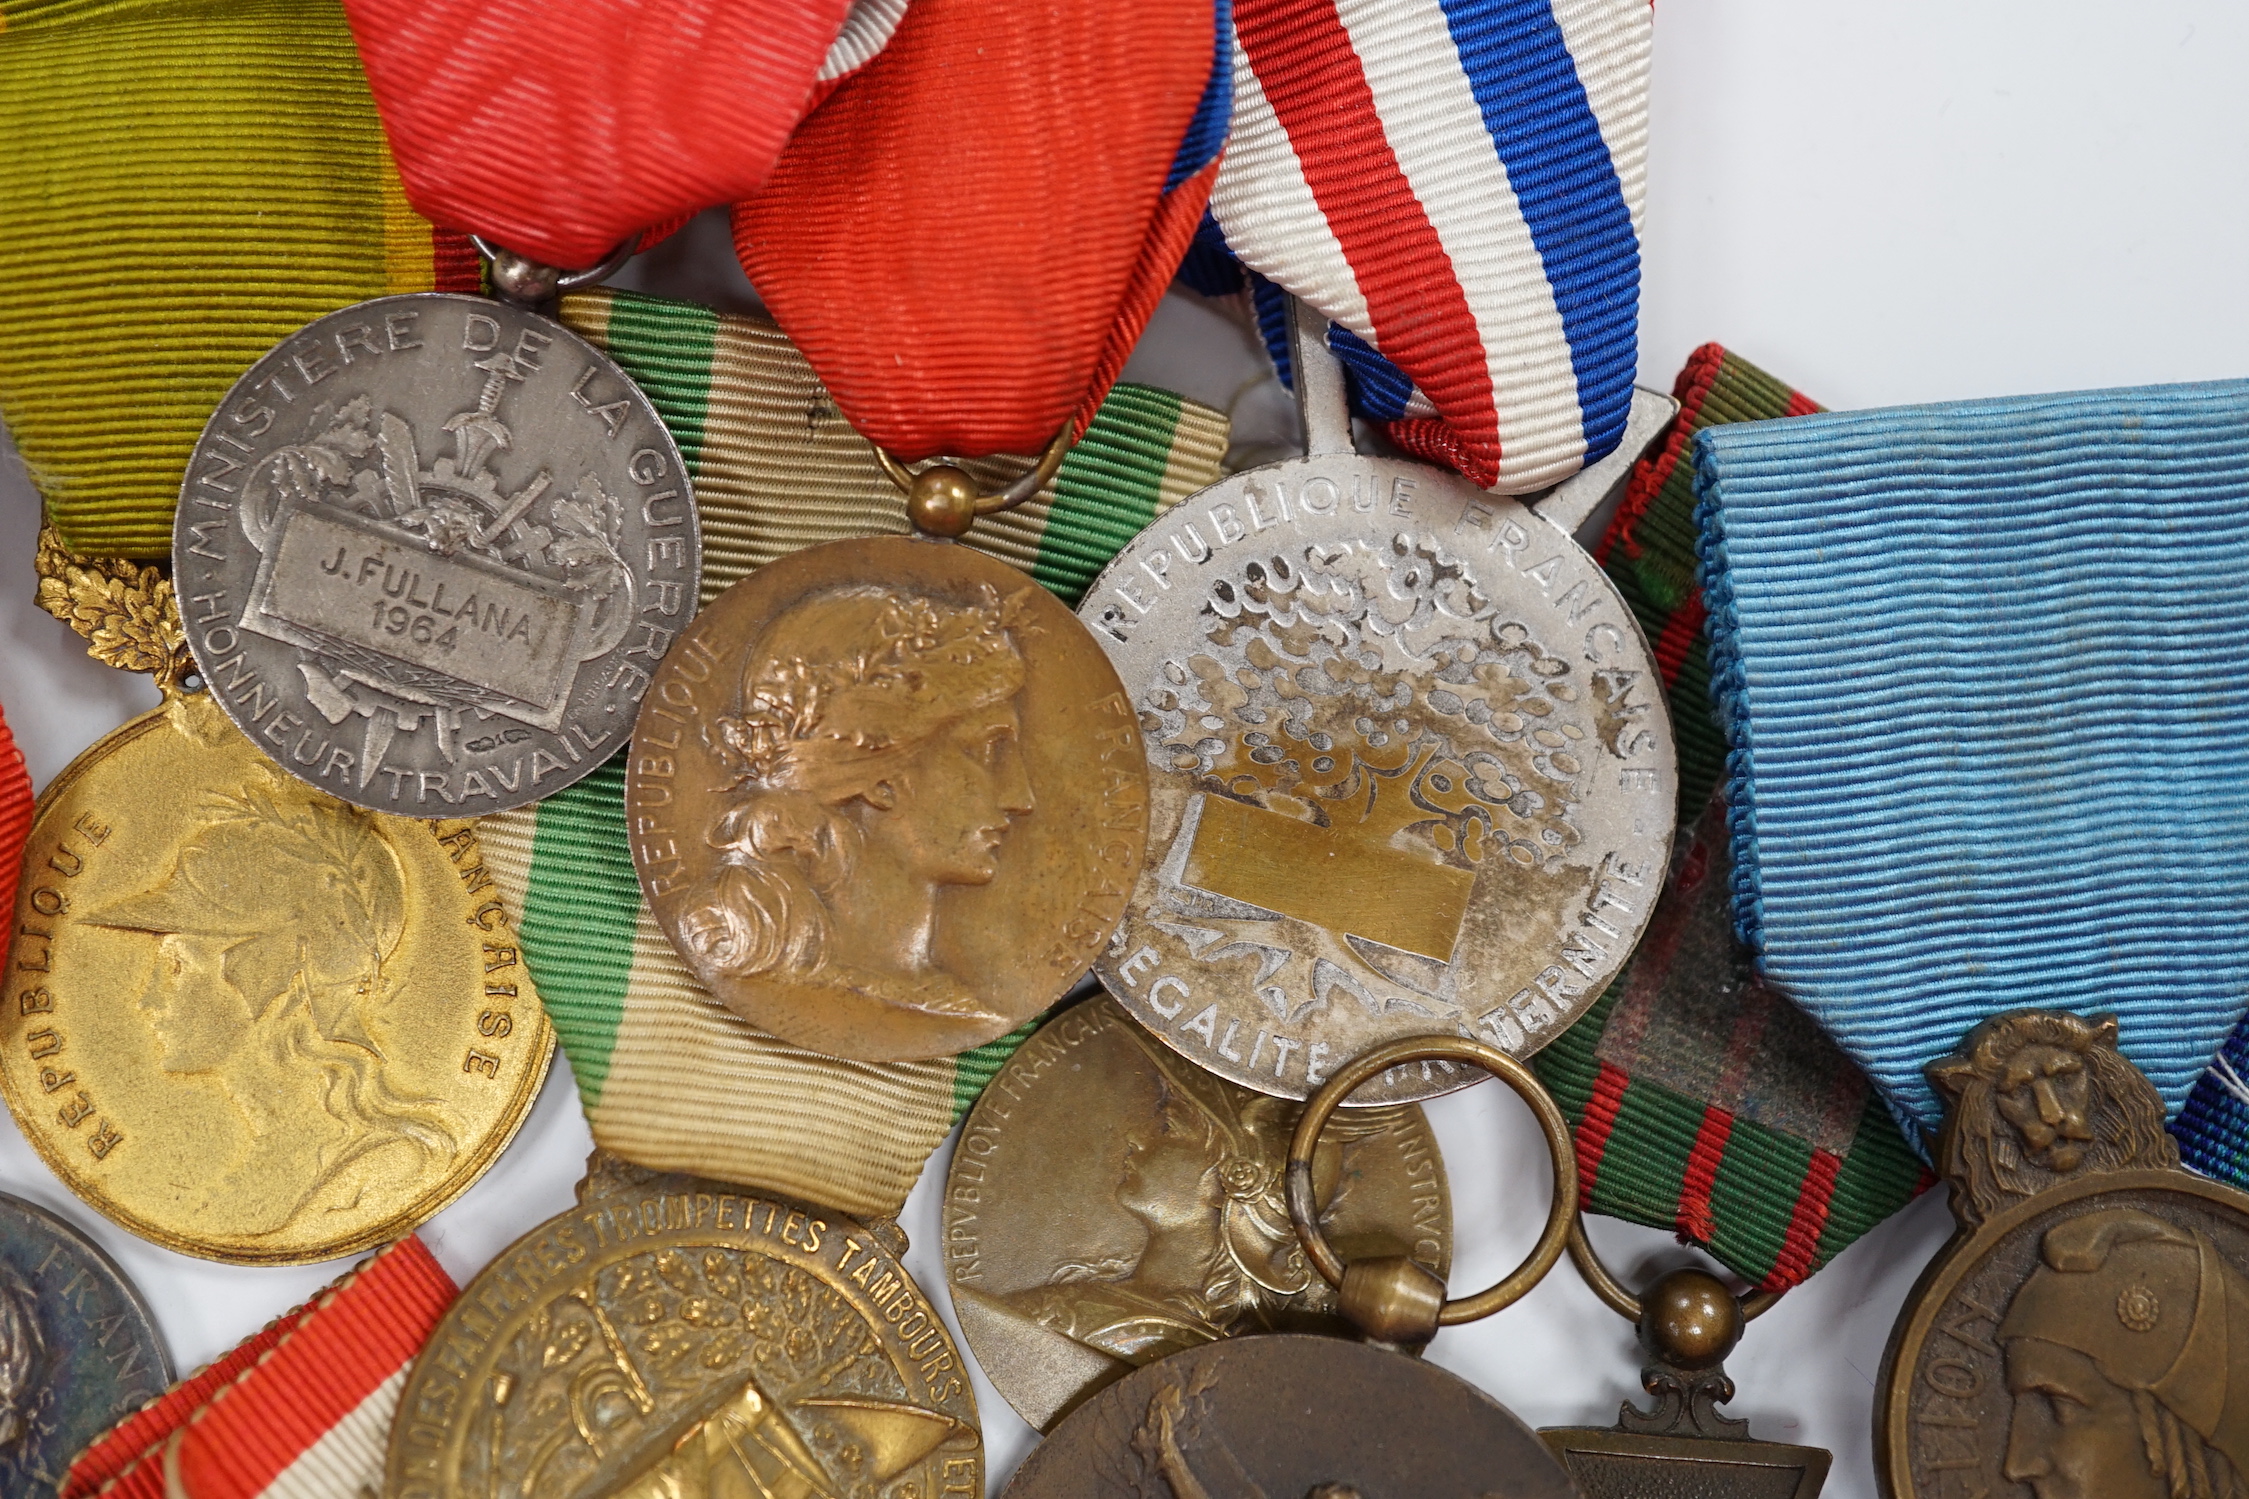 Eighteen French and Belgium medals, etc. including; Medal of Honour, War Cross, Medal of Honour - Image 17 of 17